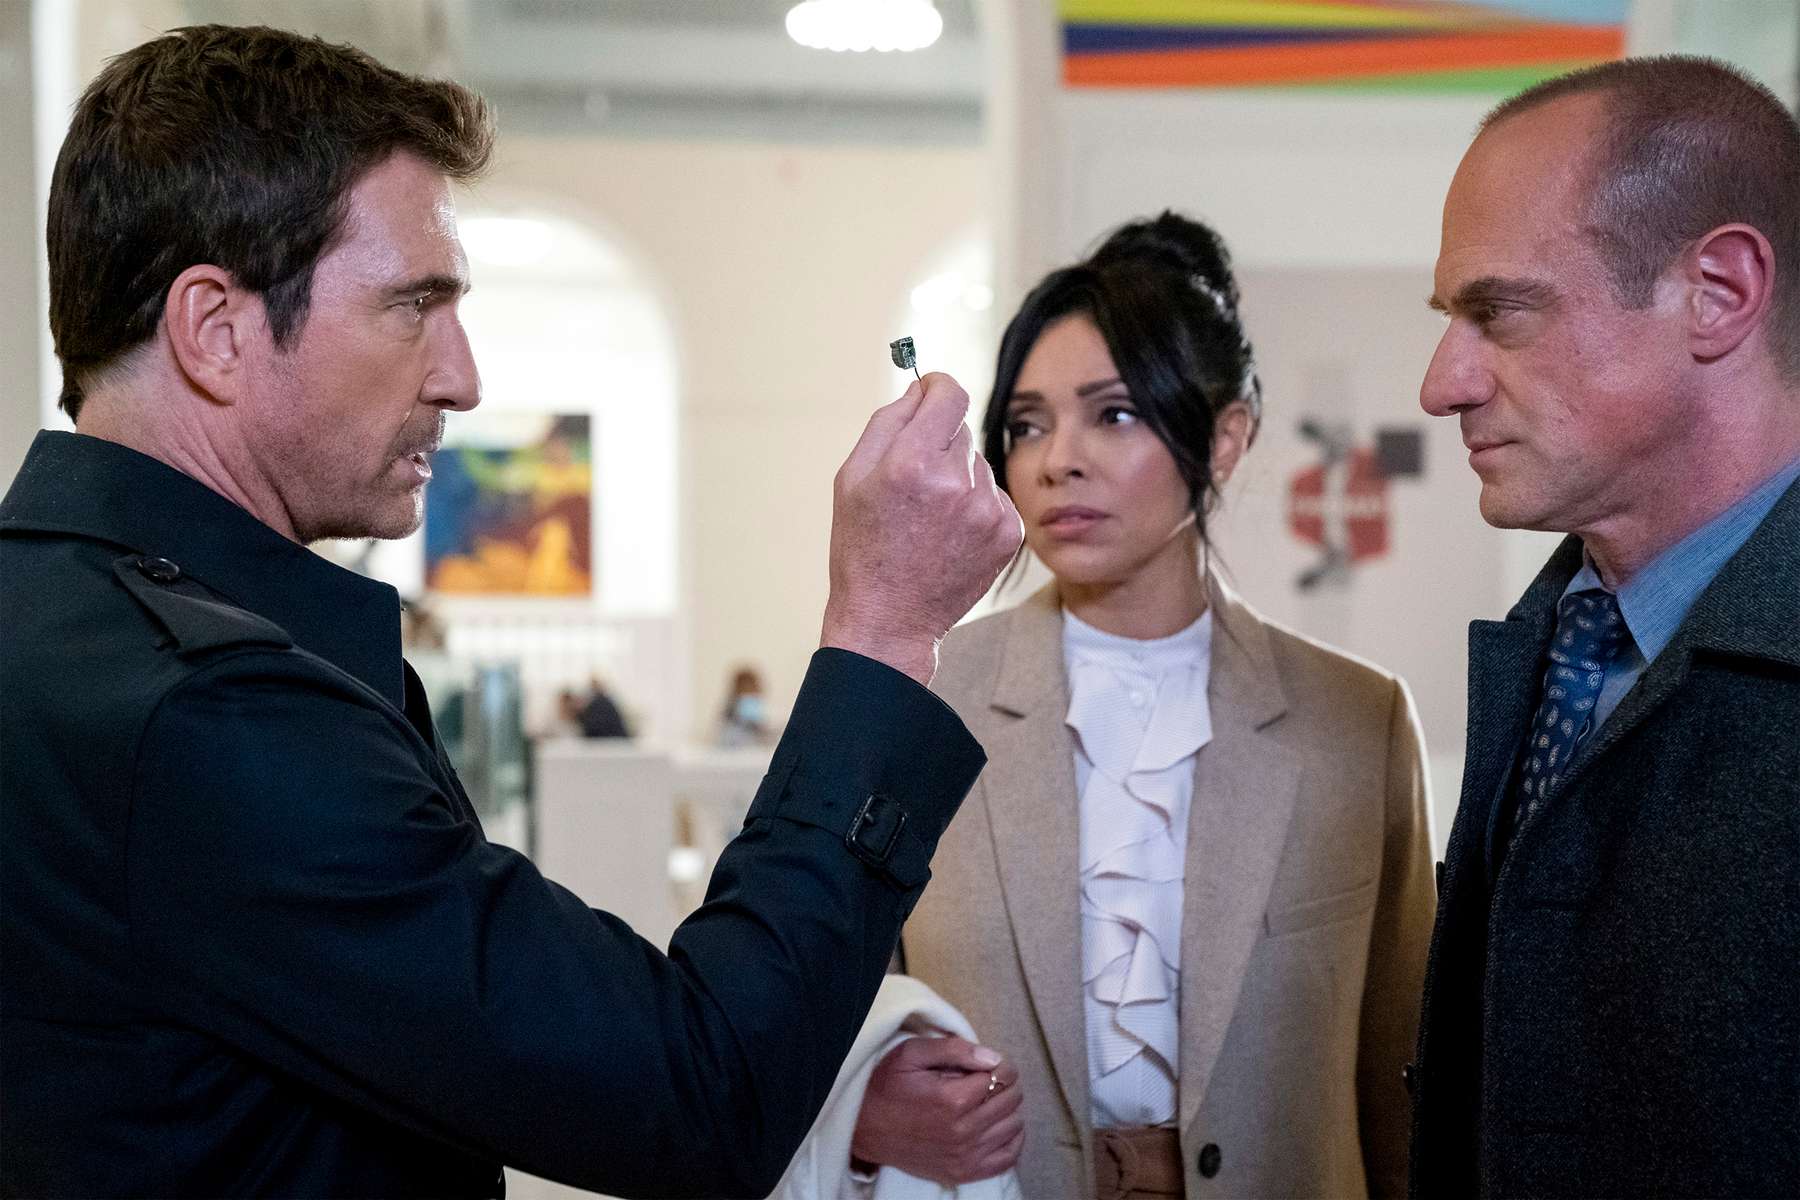 LAW & ORDER: ORGANIZED CRIME -- {quote}An Inferior Product{quote} Episode 105 -- Pictured: (l-r) Dylan McDermott as Richard Wheatley, Tamara Taylor as Angela Wheatley, Christopher Meloni as Detective Elliot Stabler -- (Photo by: Heidi Gutman/NBC)